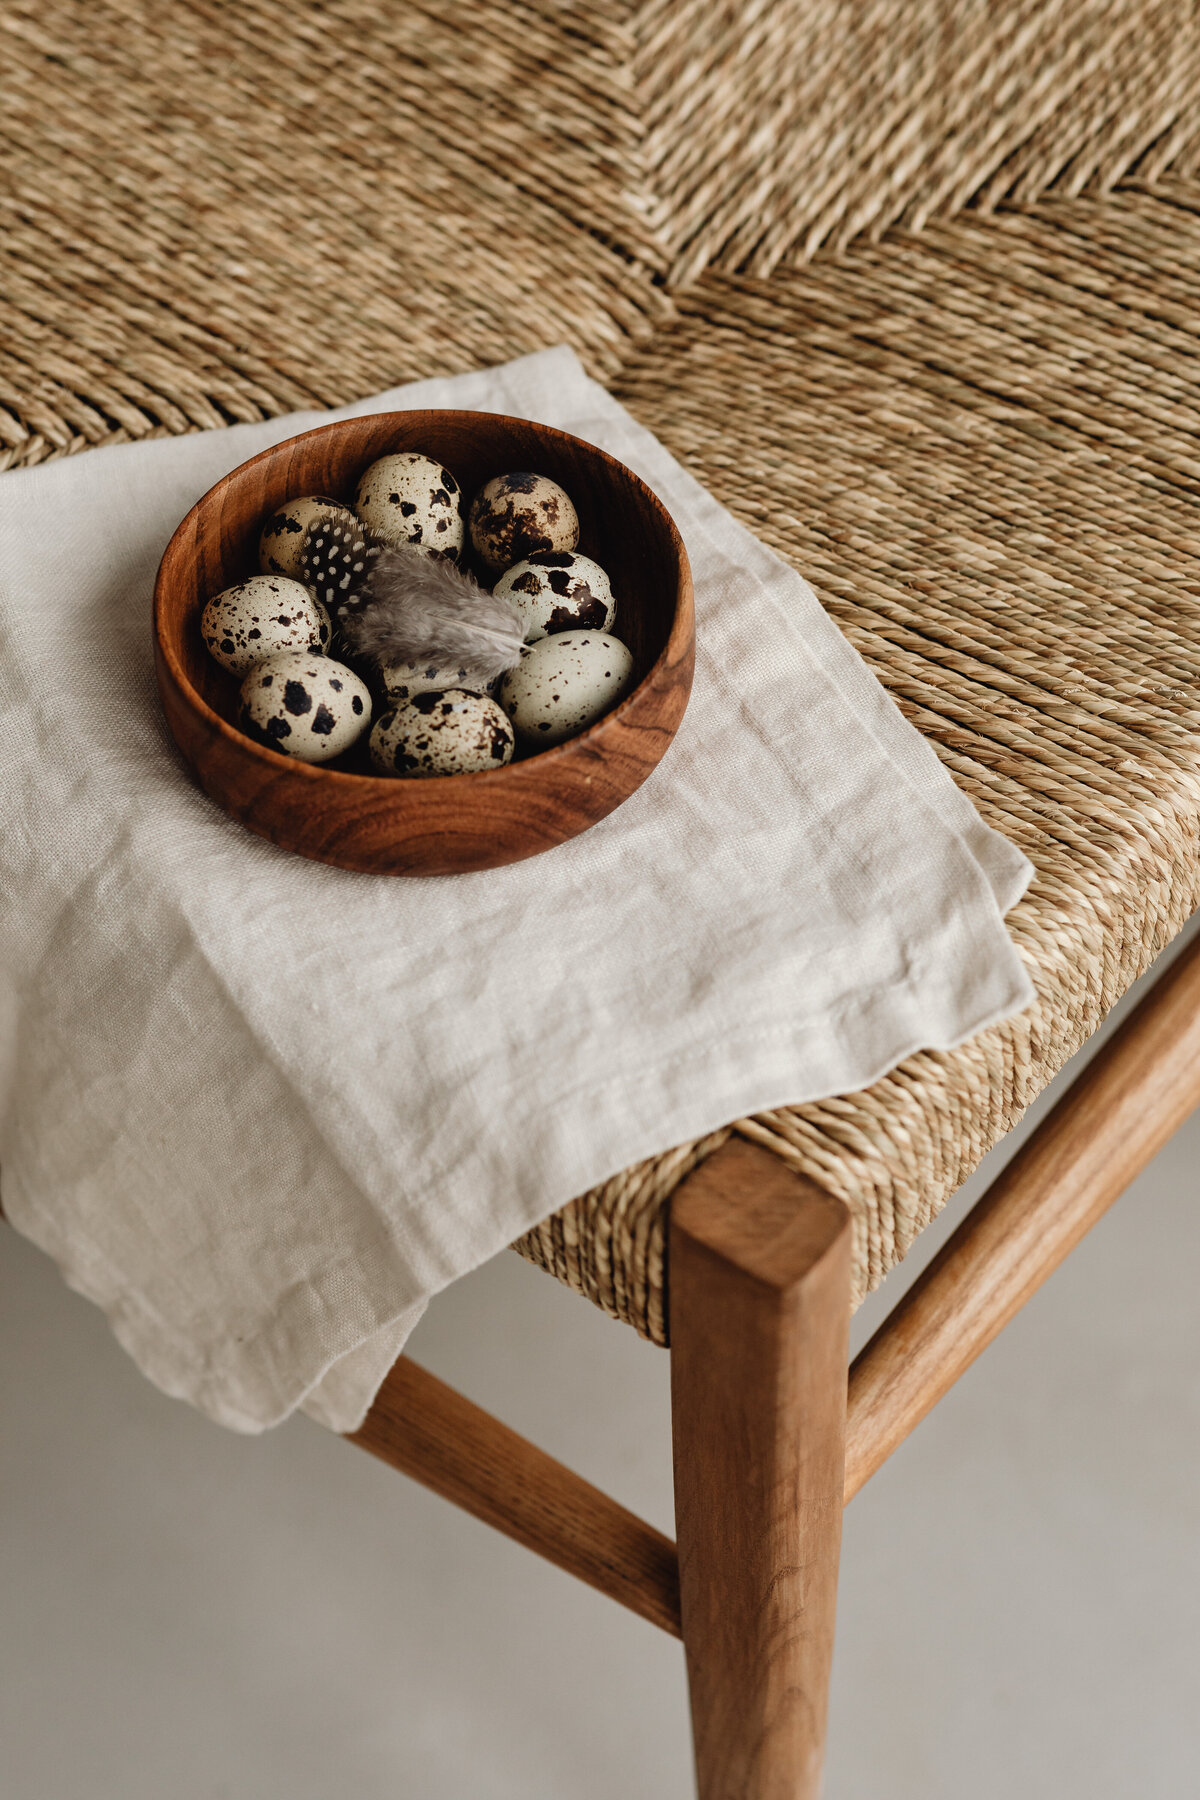 earth-tone speckled eggs and feather  in a wooden bowel on a wicker chair and linen cloth